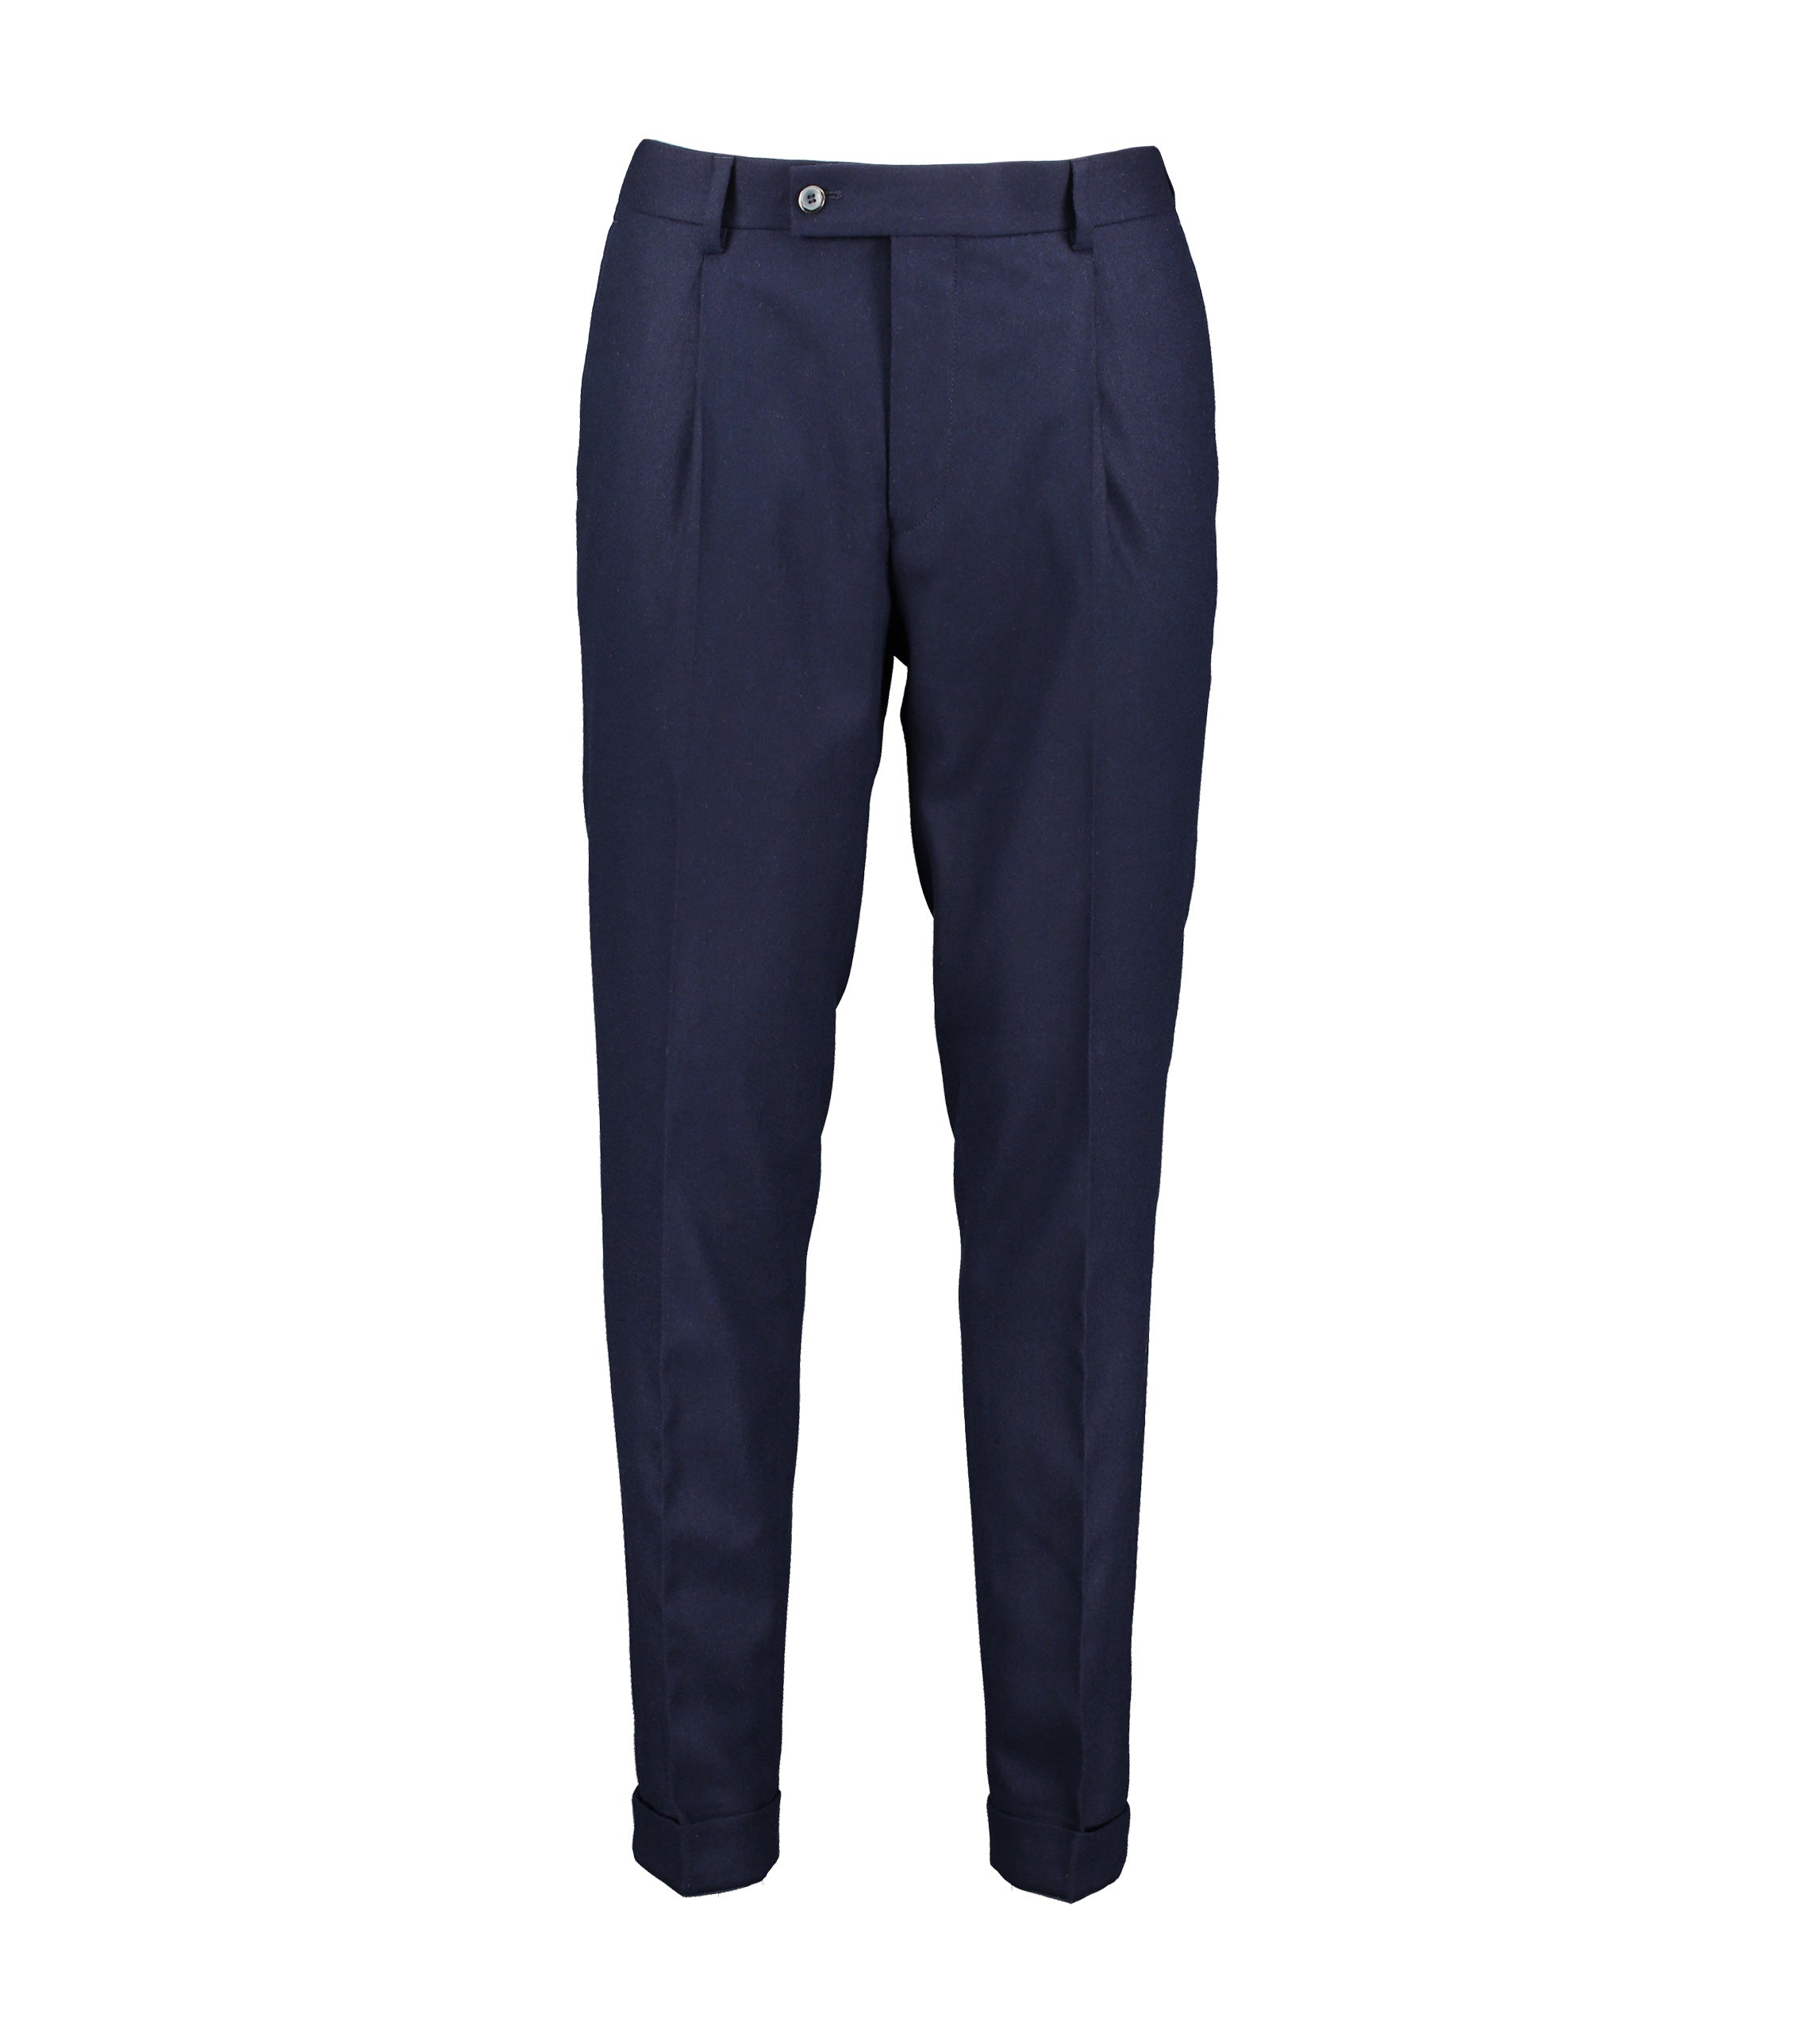 Alex Navy Flannel Stretch Trousers